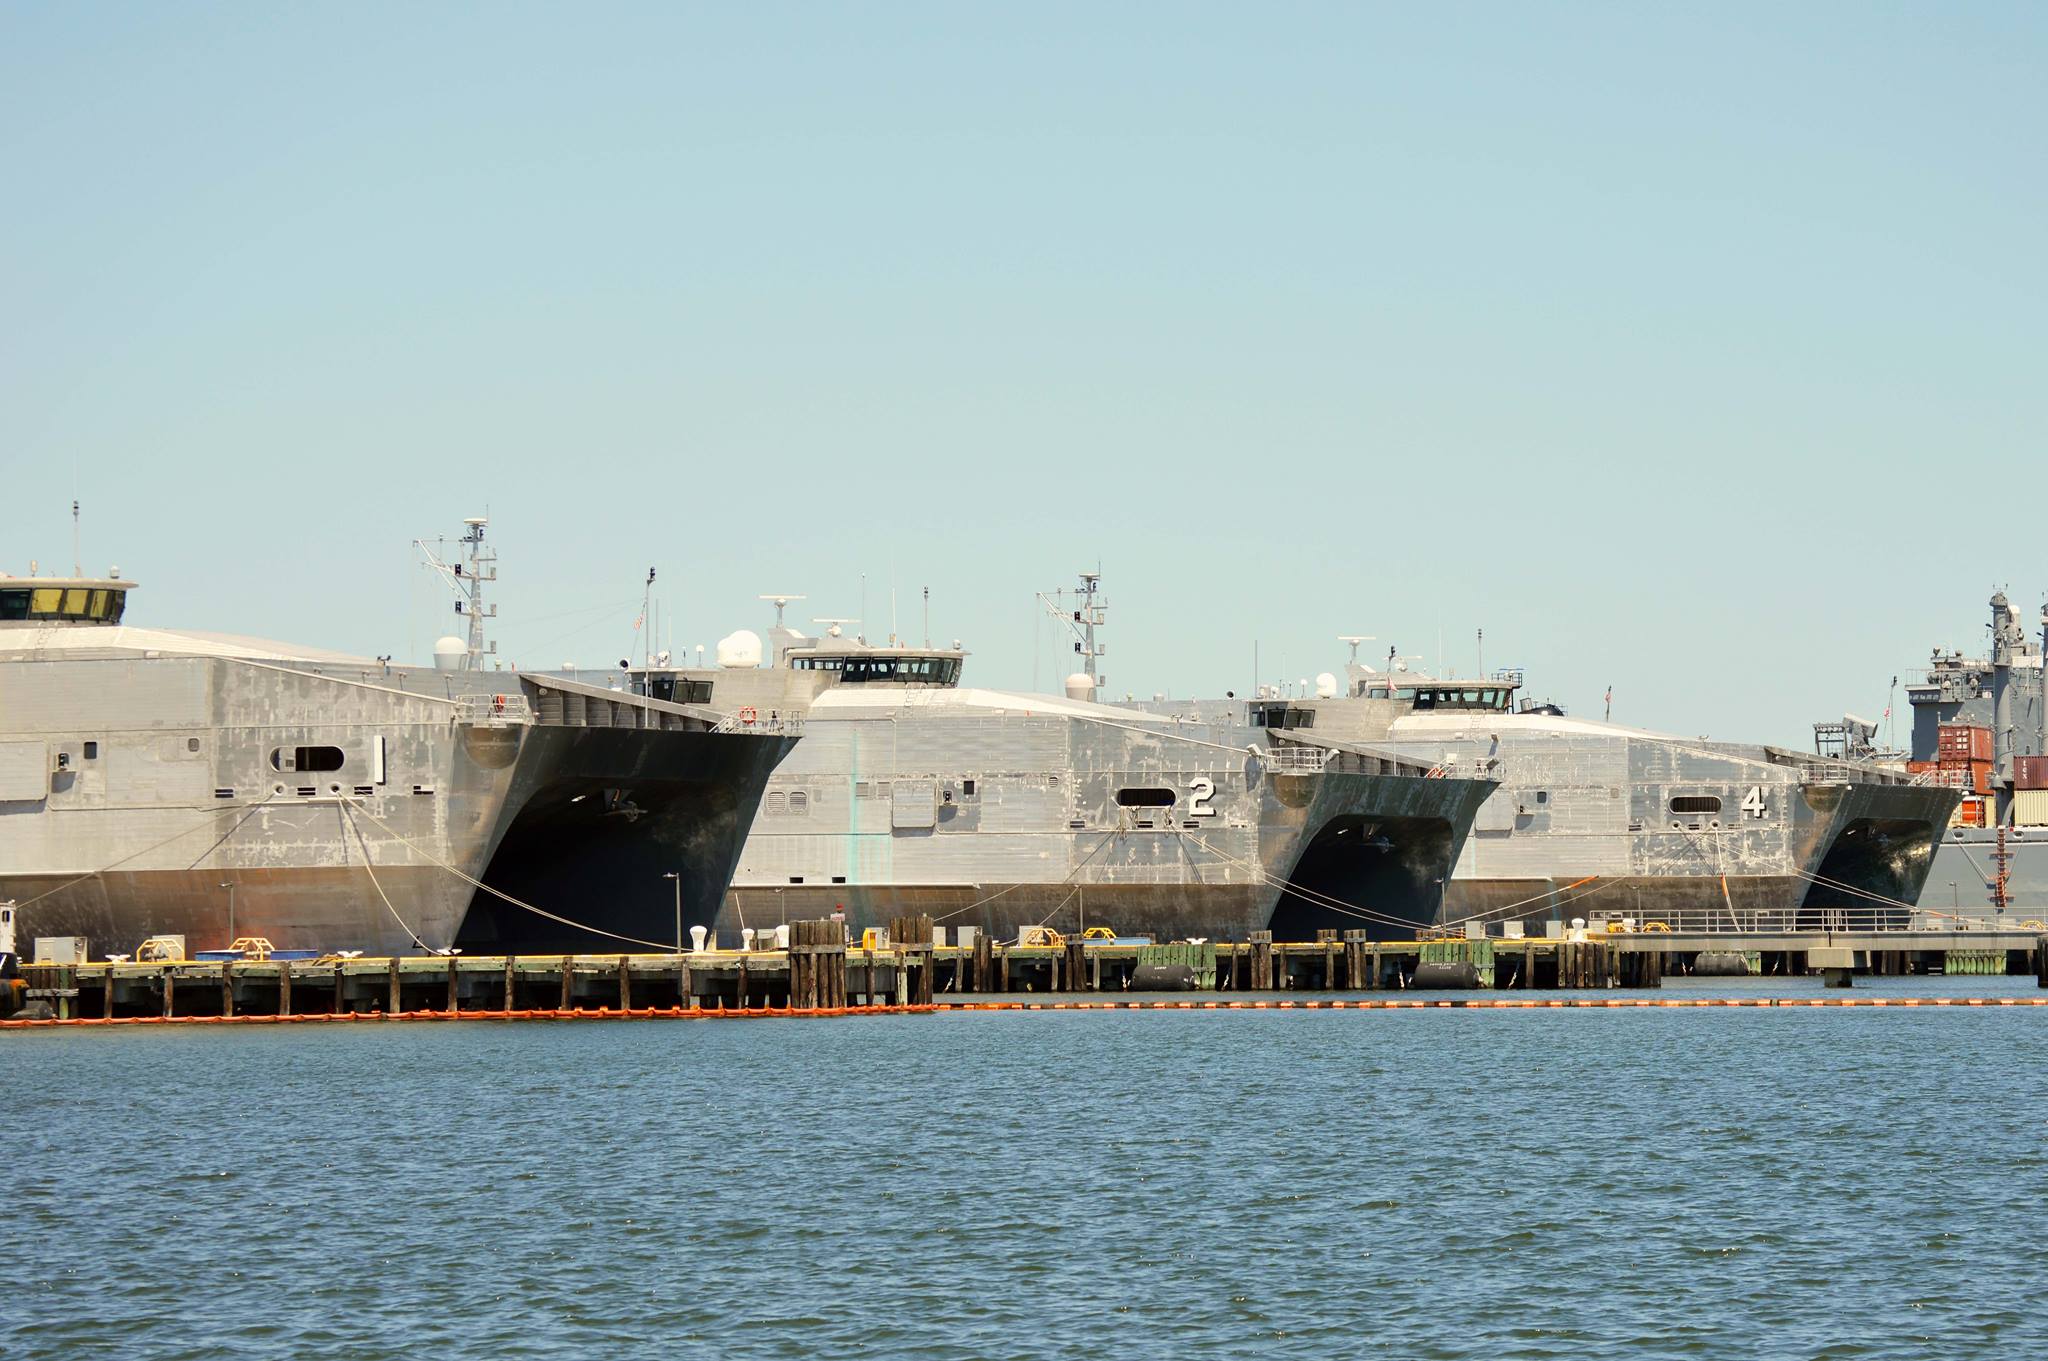 The Spearhead-class expeditionary fast transport (EPF) is a United States Navyâ€“led shipbuilding program to provide 